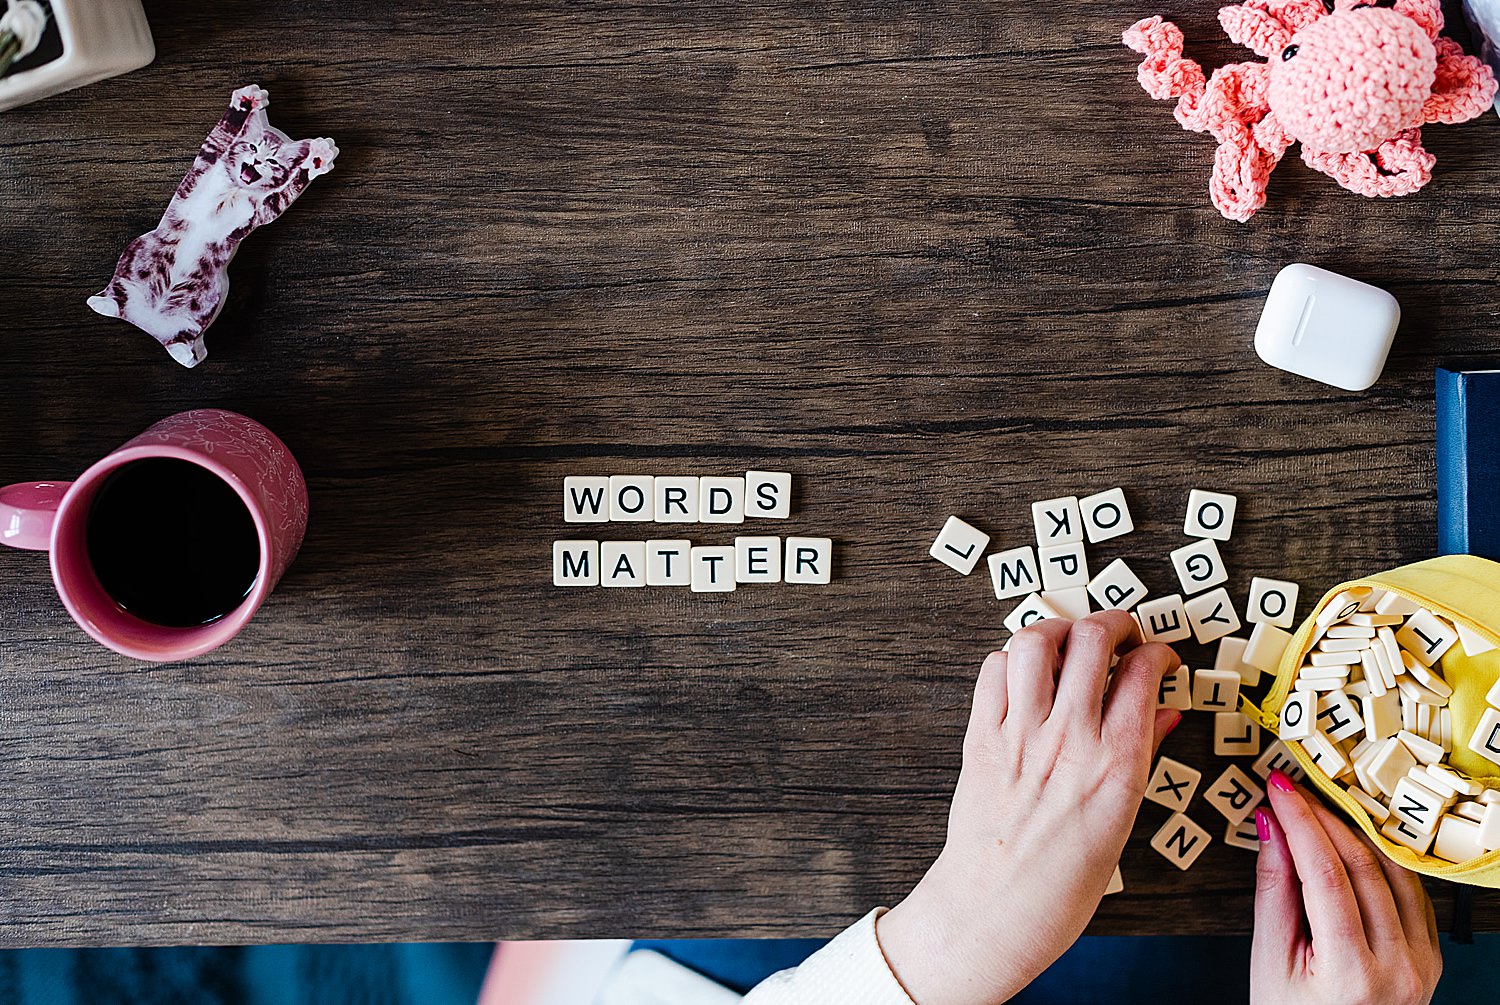 flatlay image of a wooden tabletop with letter tiles that spells out "WORDS MATTER" in the middle. there's a couple of scattered tiles and some in a yellow pouch on the lower right hand side with two hands picking up some tiles, above that there's an airpods case and a knitted coral-colored octopus and on the left side of the photo is a pink mug with black coffee